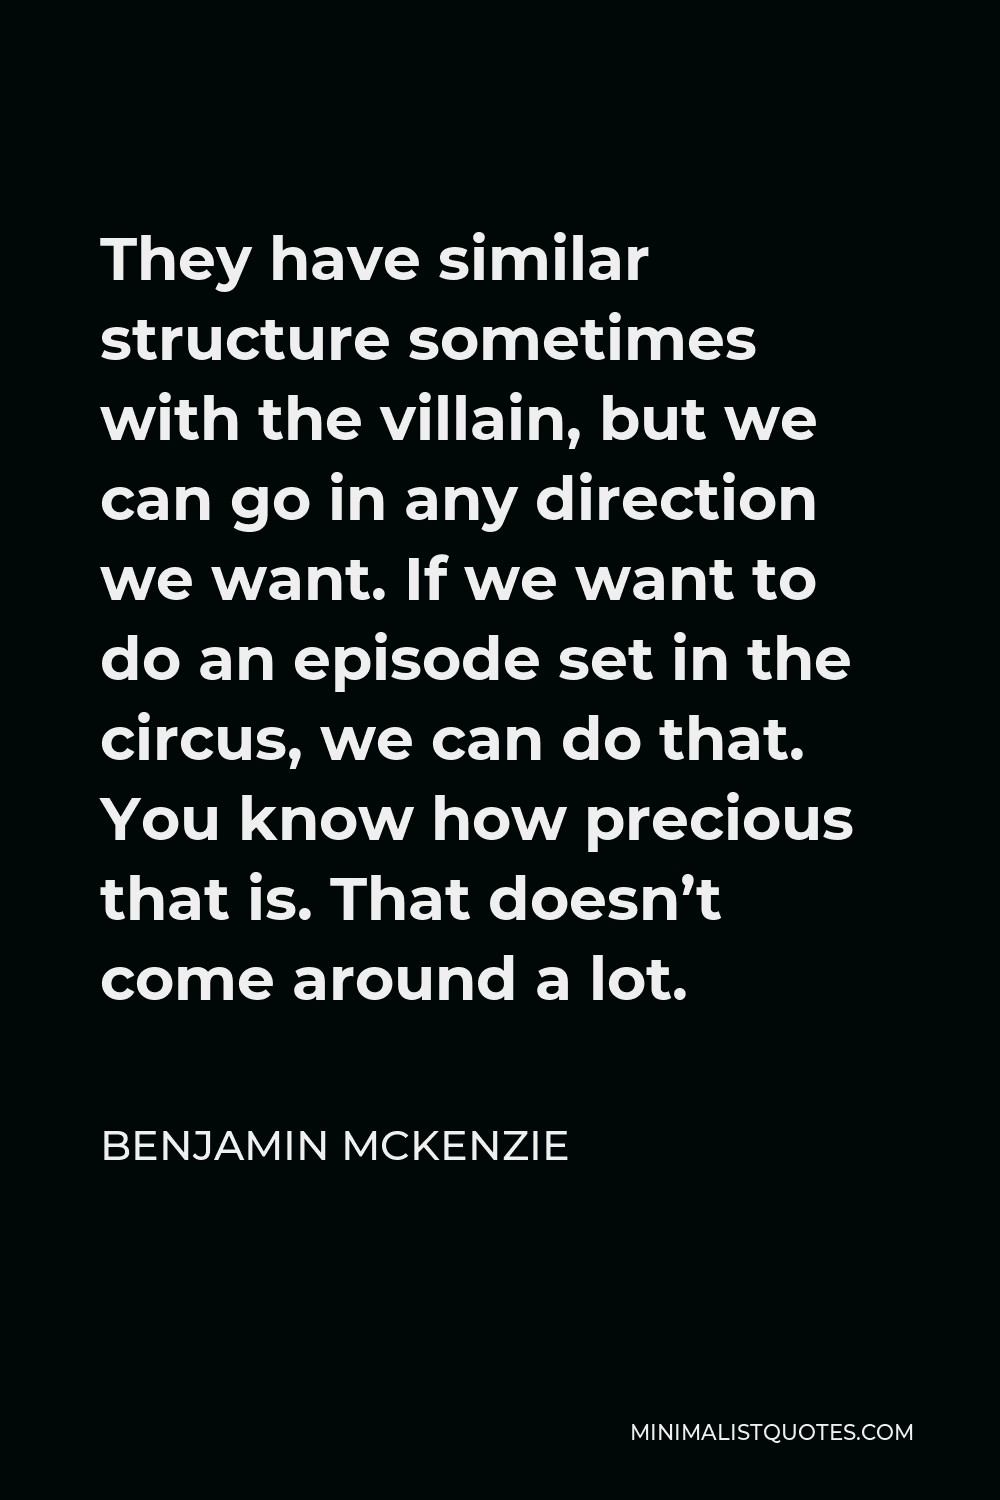 Benjamin McKenzie Quote - They have similar structure sometimes with the villain, but we can go in any direction we want. If we want to do an episode set in the circus, we can do that. You know how precious that is. That doesn’t come around a lot.